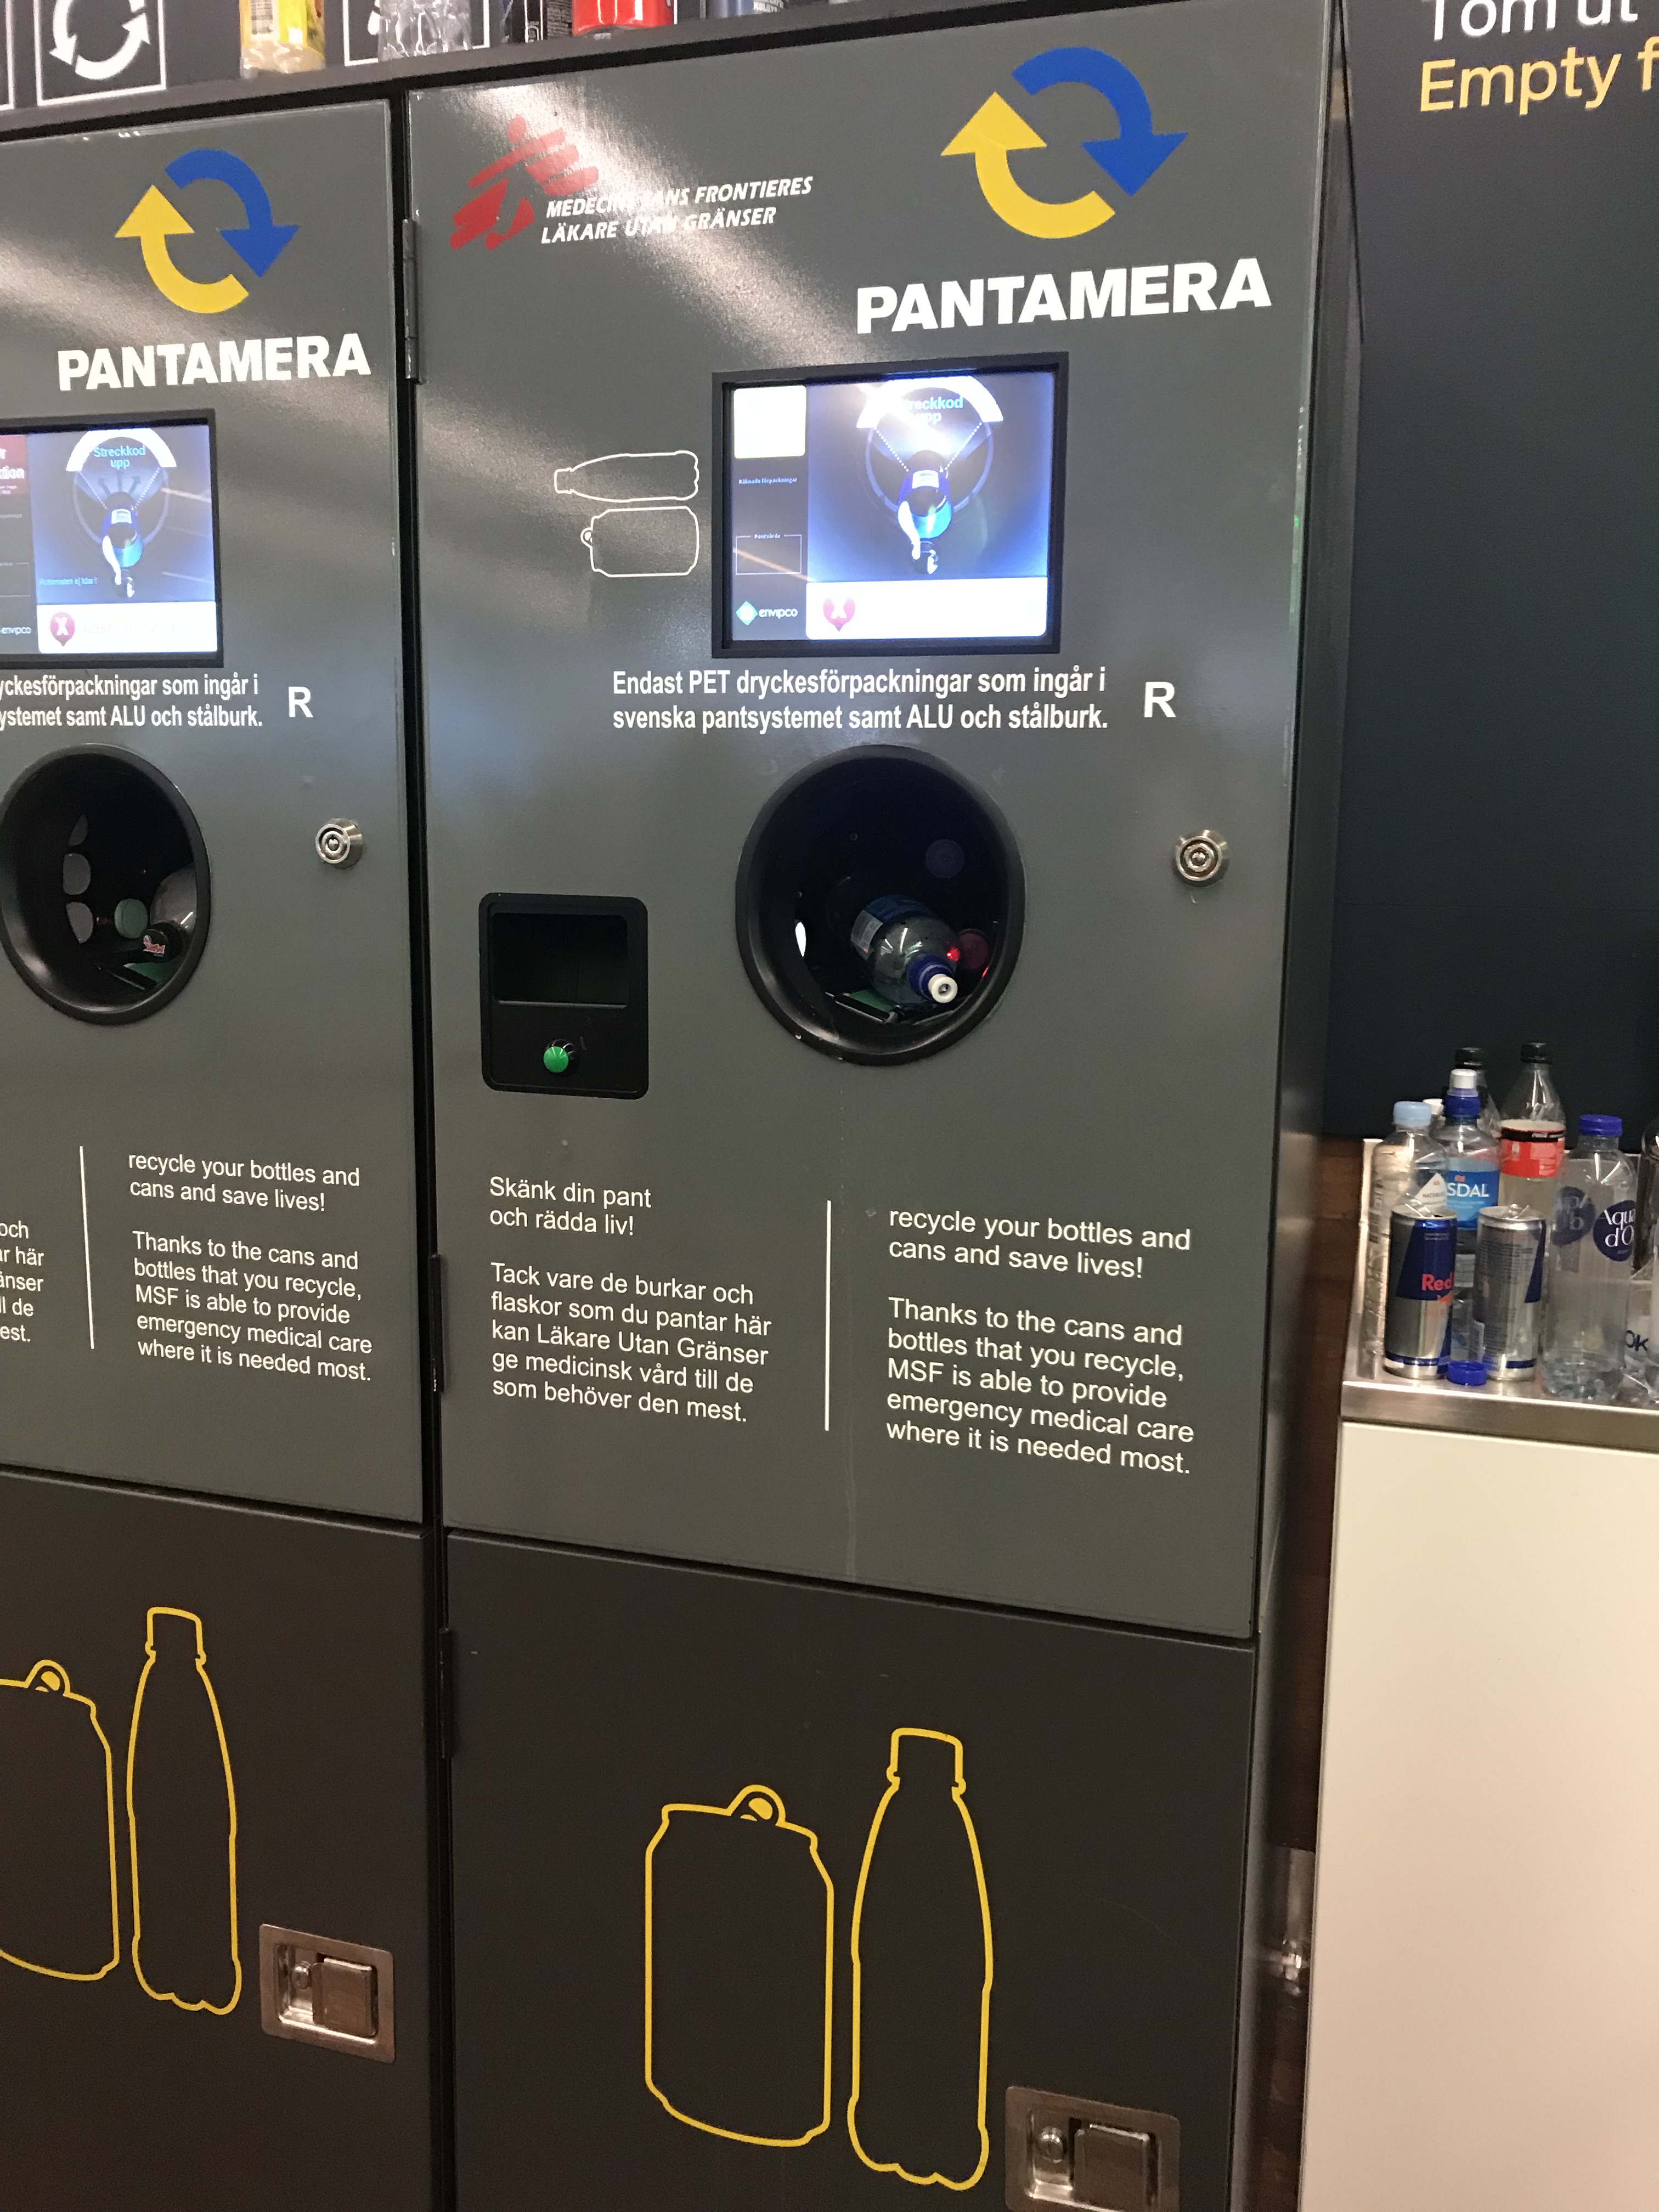 Recycling your bottles and cans at a Pantamera machine in Gothenburg Landvetta Airport, Sweden